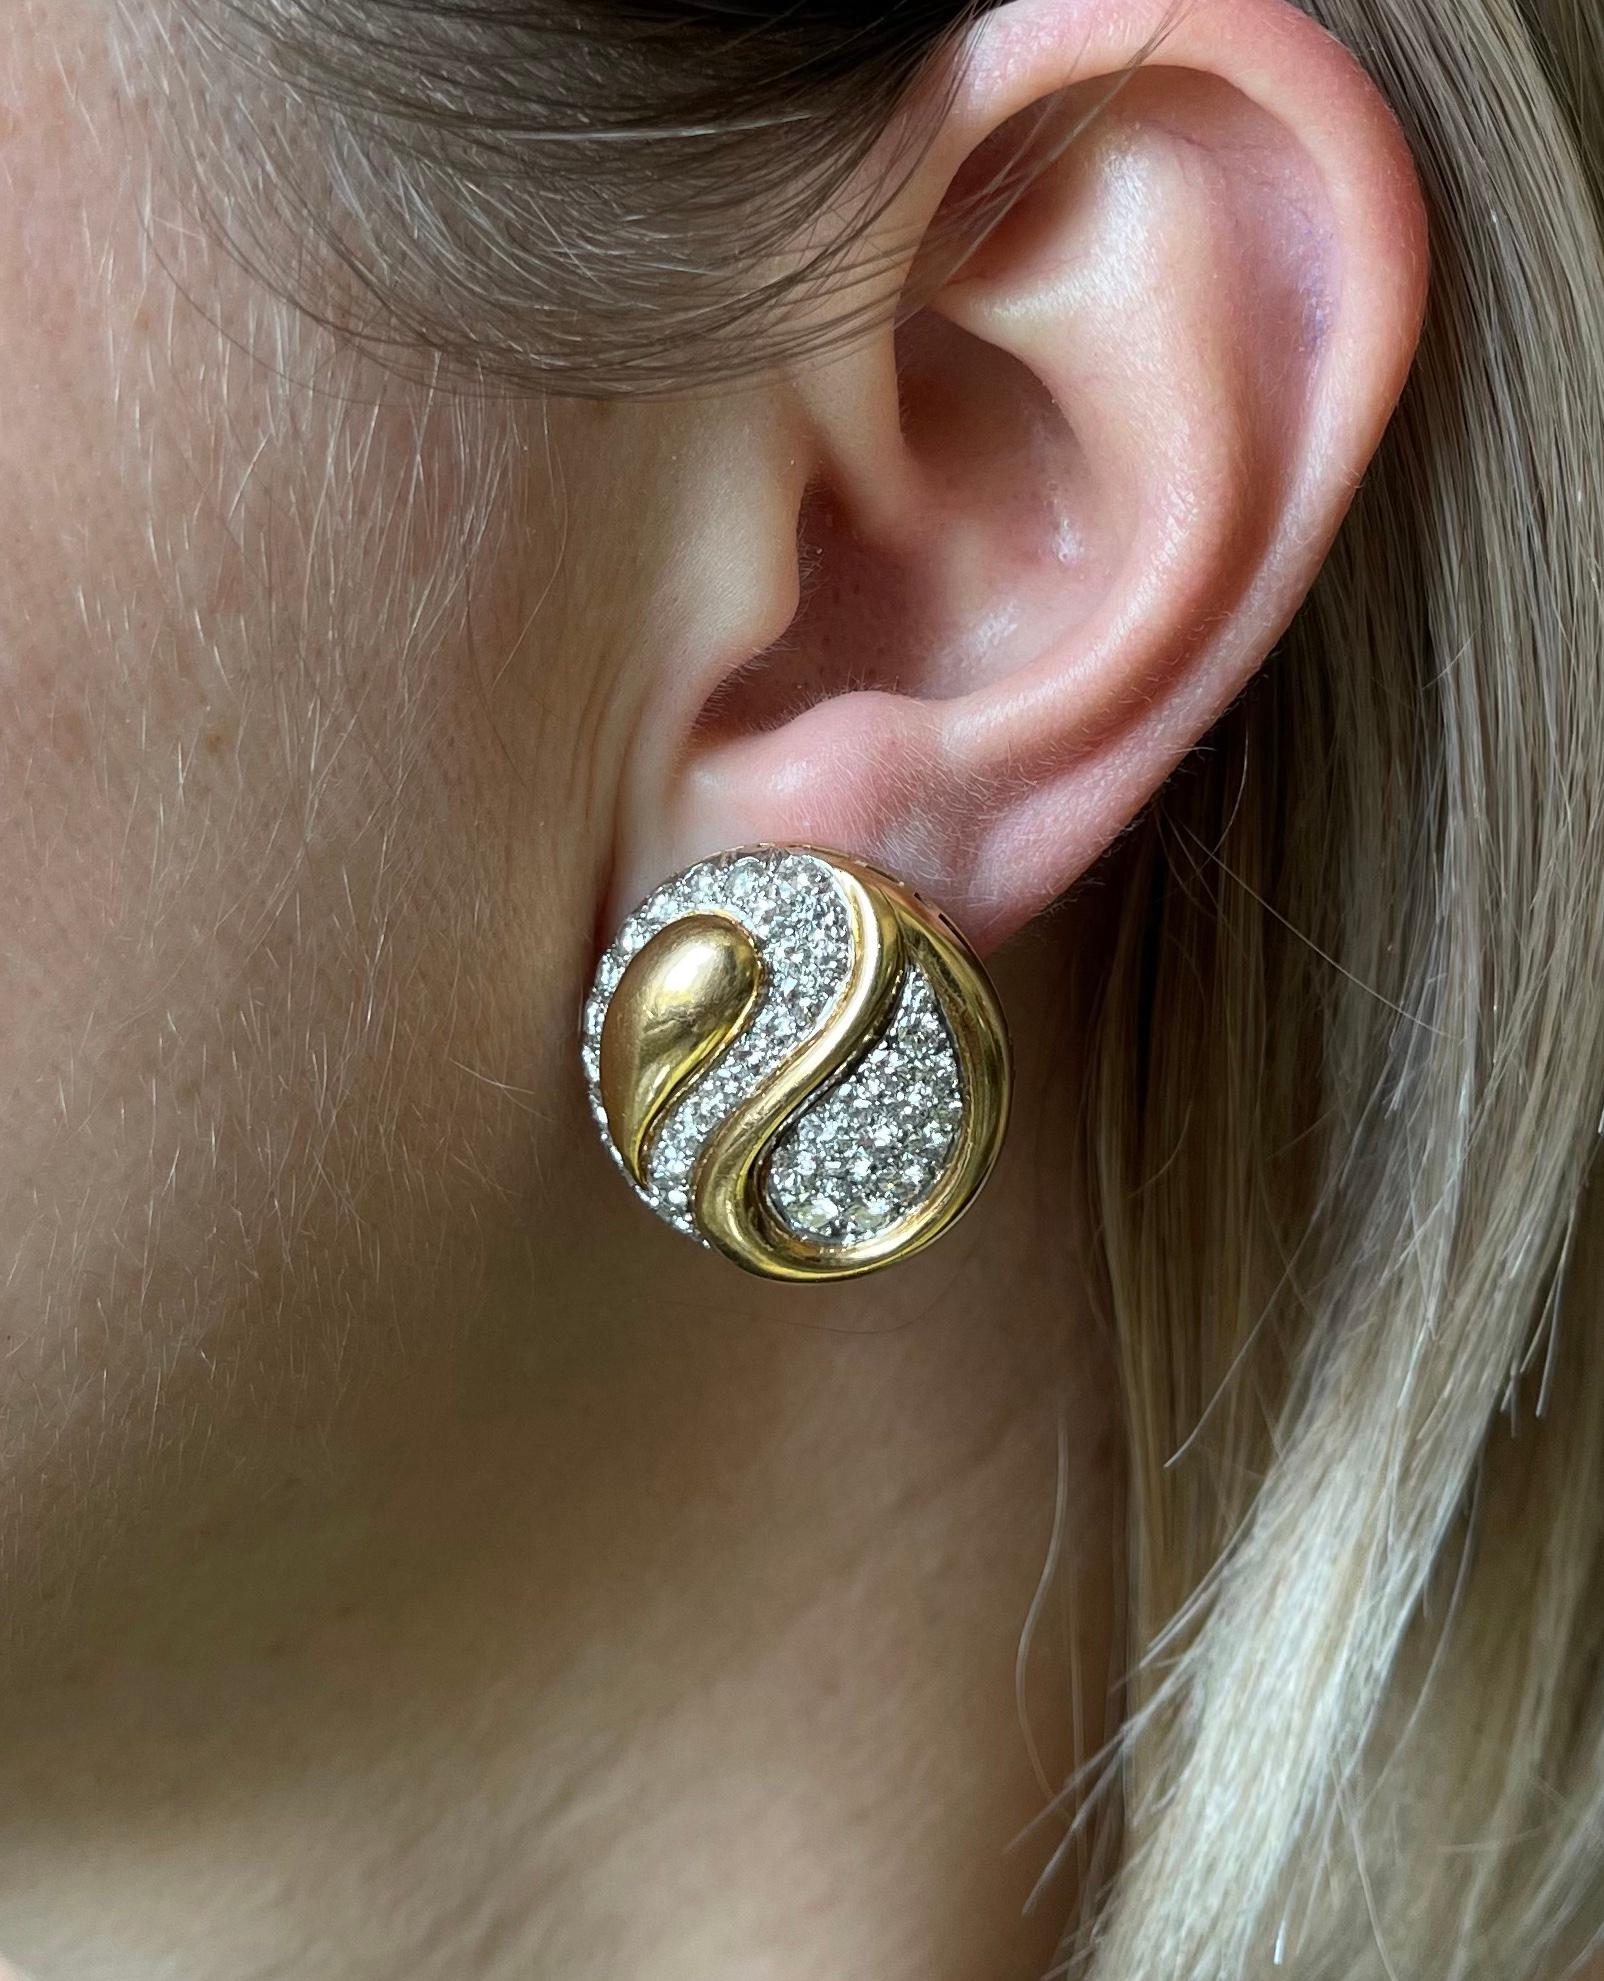 Exquisite French made pair of button earrings by Van Cleef & Arpels, in 18k yellow gold, set with approx. 3.80ctw in FG/VVS diamonds. Earrings measure 1